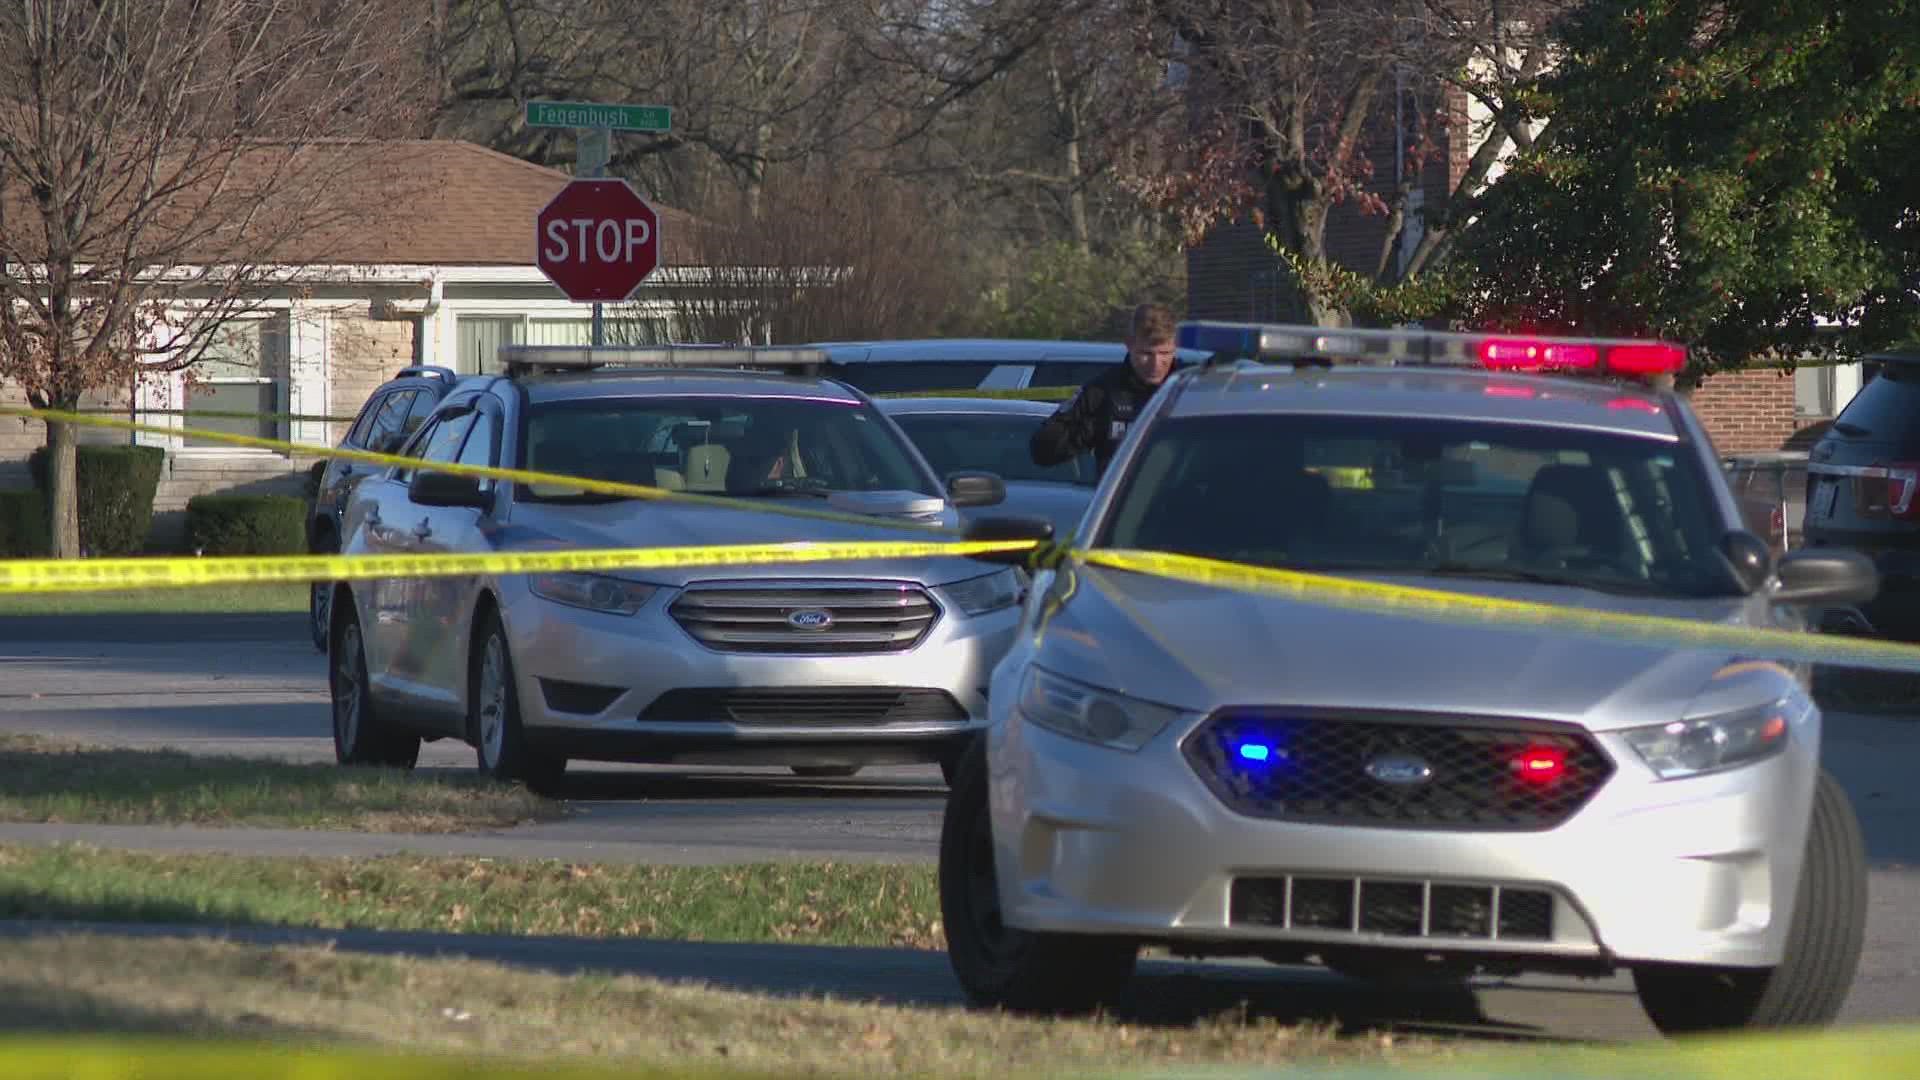 Around 2:30 p.m. on Friday, officers say they responded to call of a shooting in the 4600 block of Fegenbush Lane.